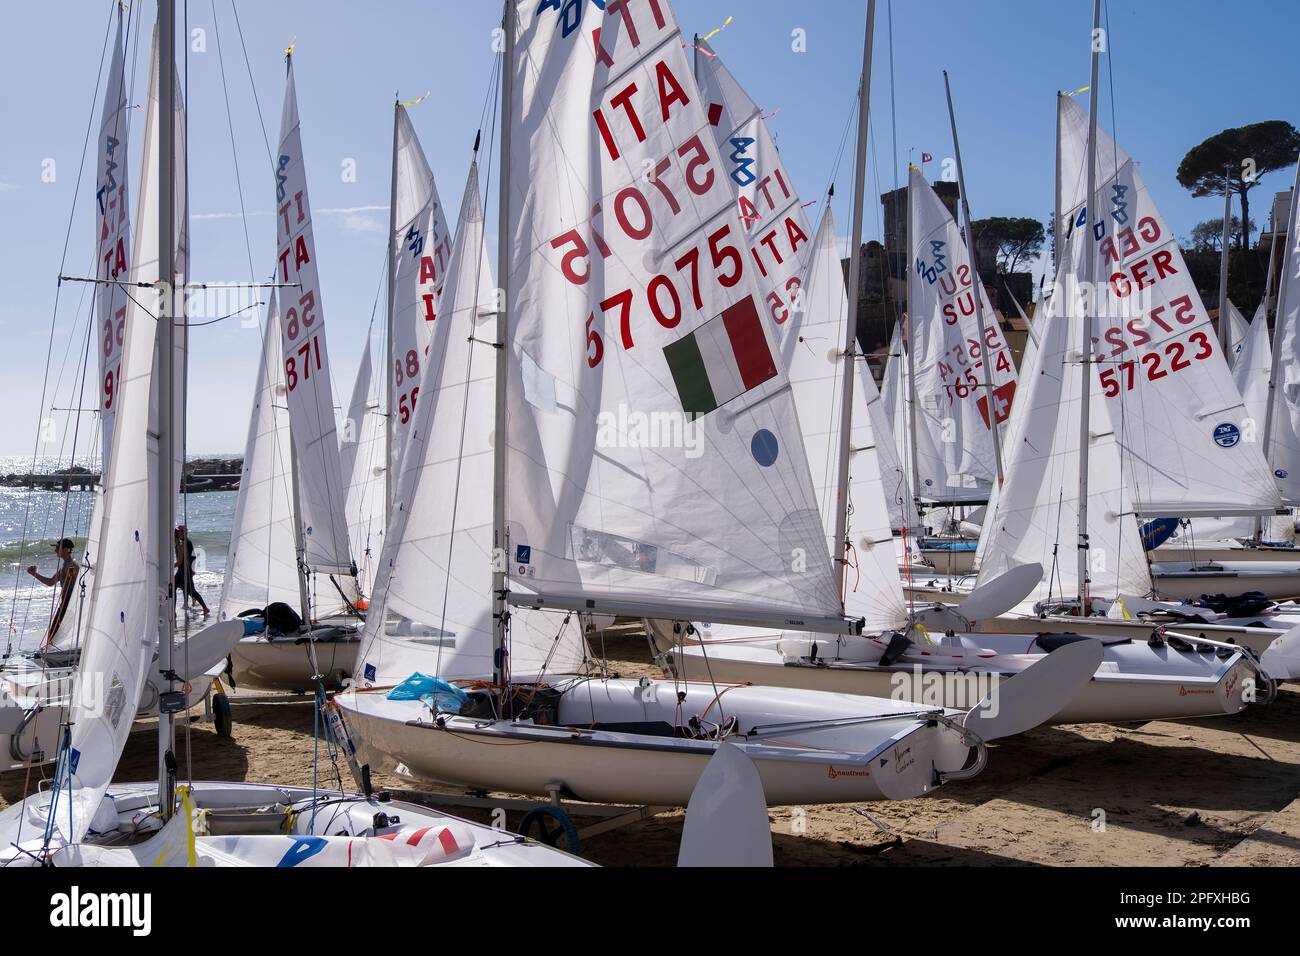 SAN TERENZO, LERICI, ITALY - MARCH 10, 2023: San Terenzo beach, crowded with sailboats before the regatta in spring. Lerici, in the Gulf of La Spezia, Stock Photo